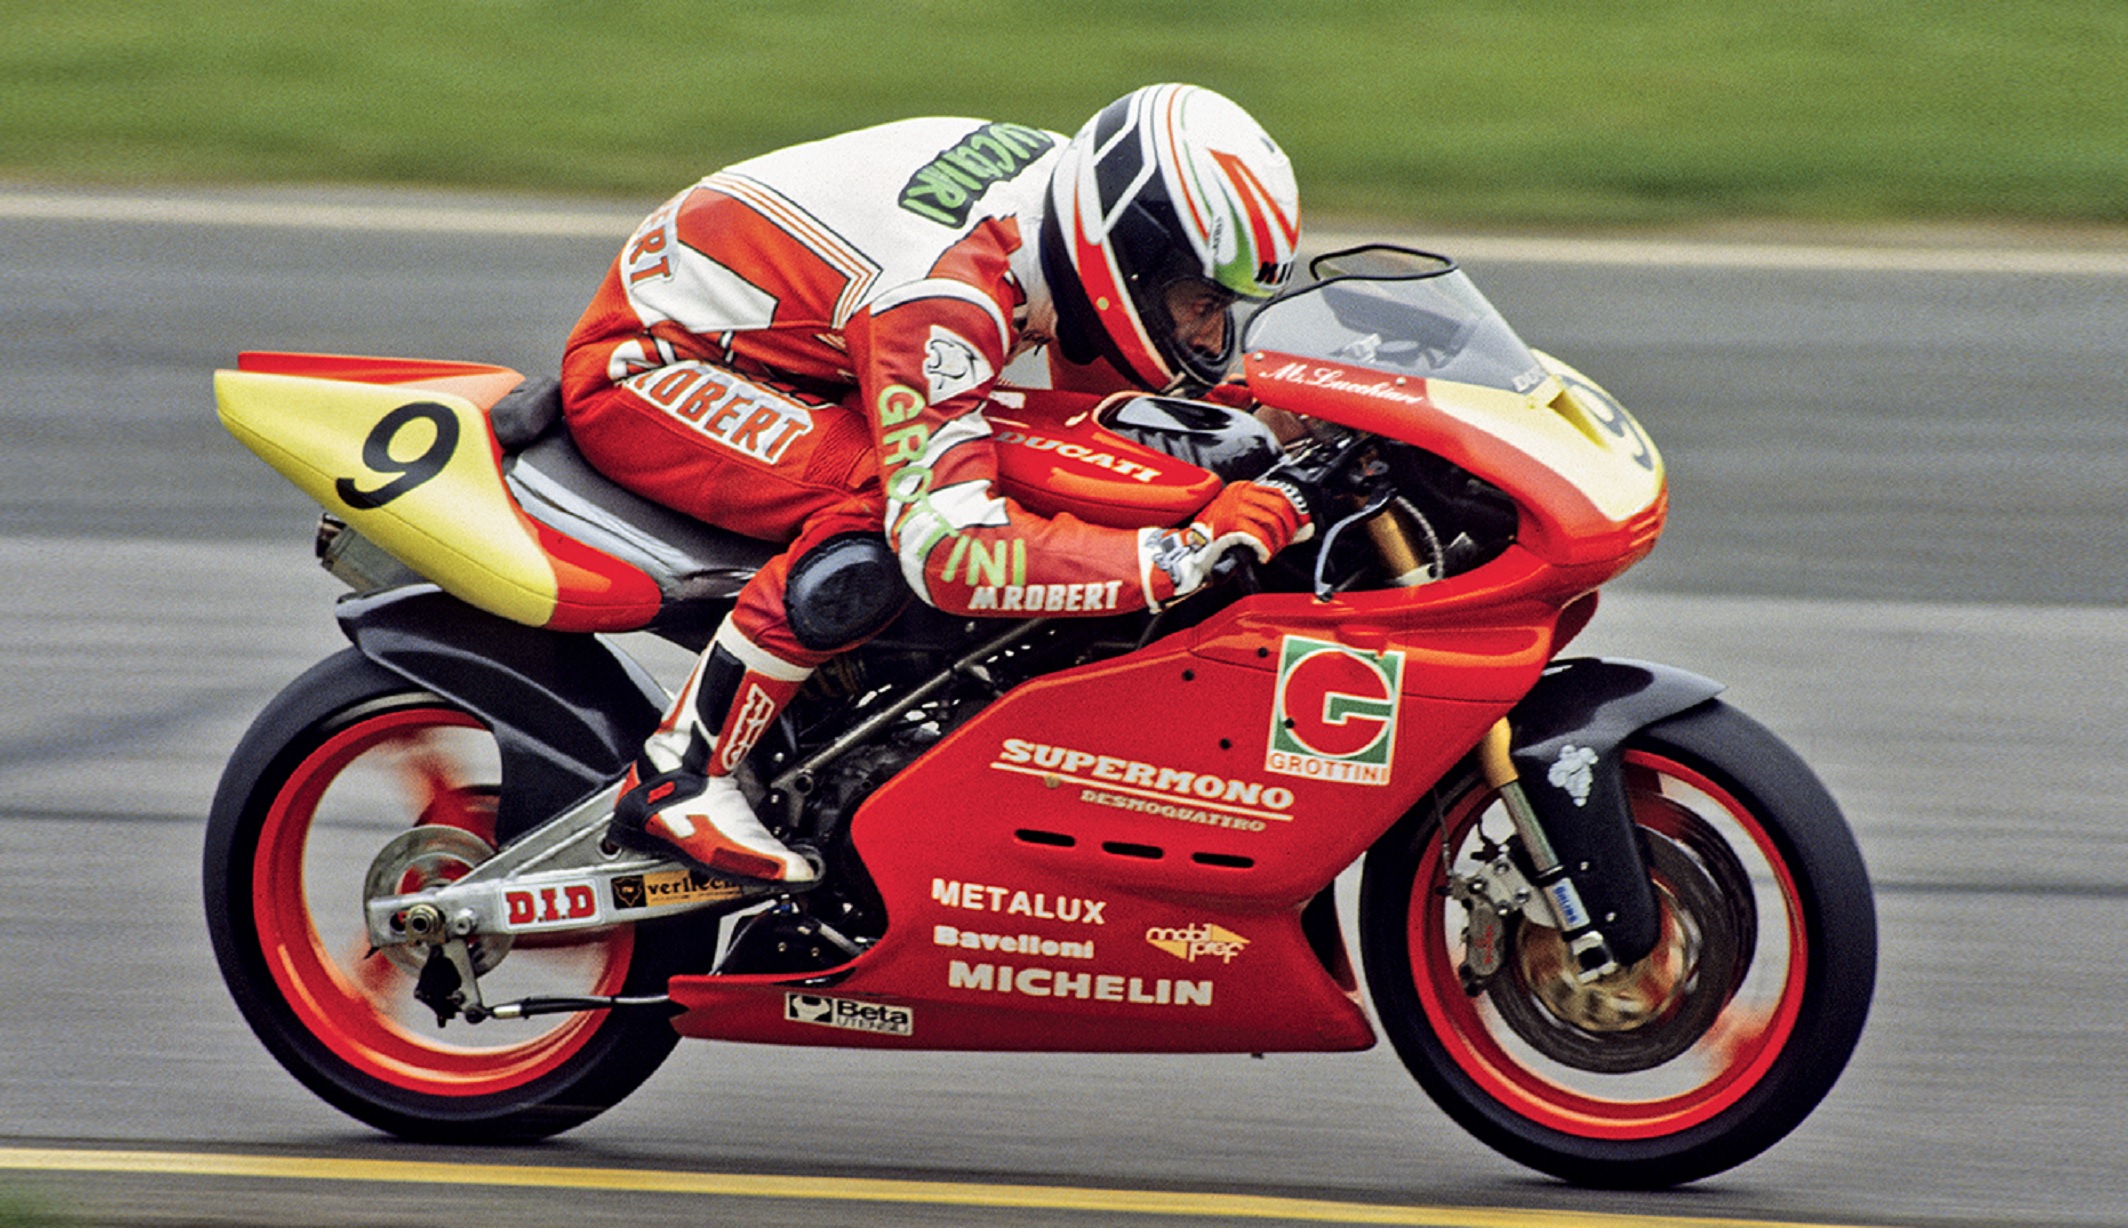 A view of a rider leaning into the Ducati Supermono